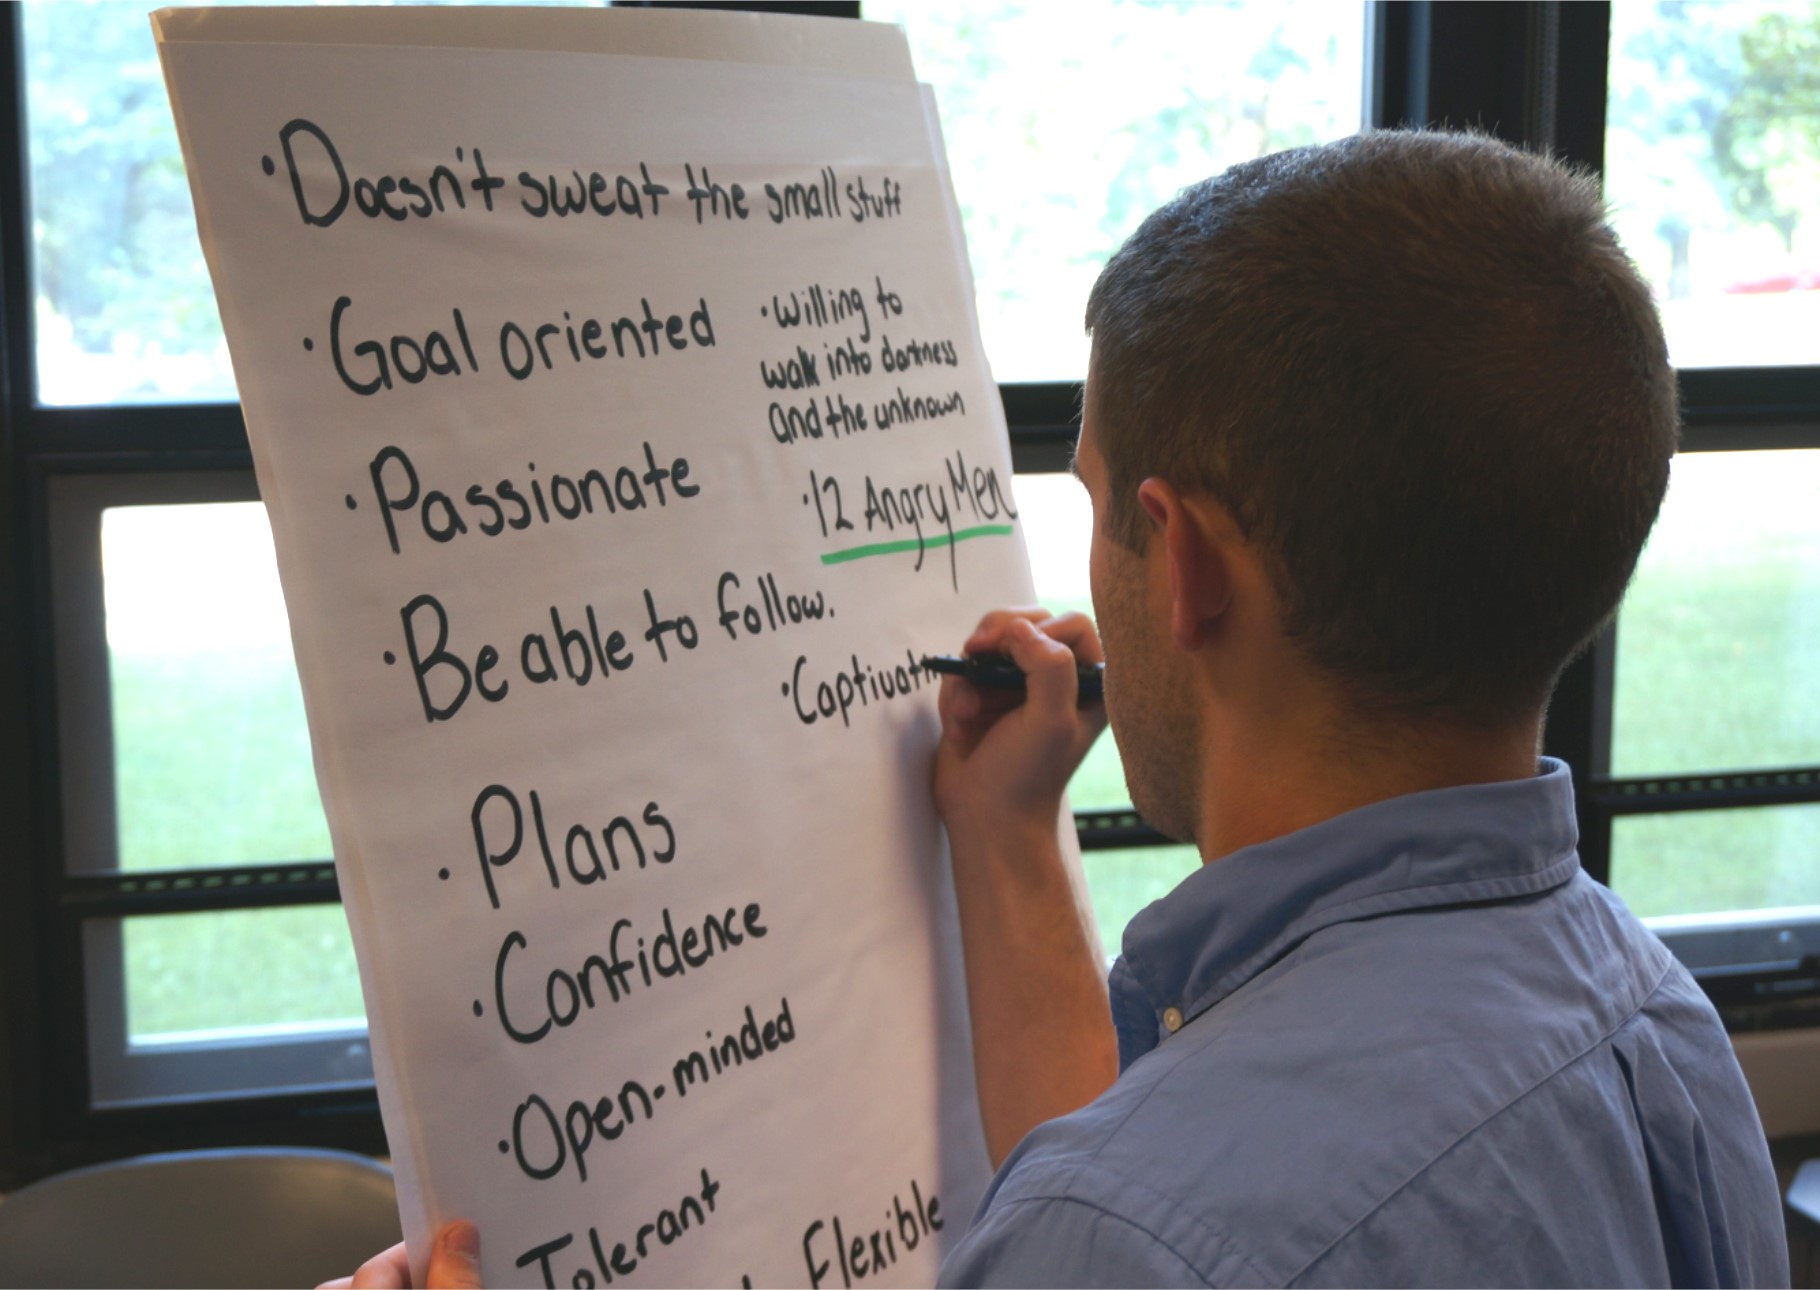 Austin Sears, of Manassas, Va., works on a leadership attributes exercise during a Pamplin program on campus this summer.